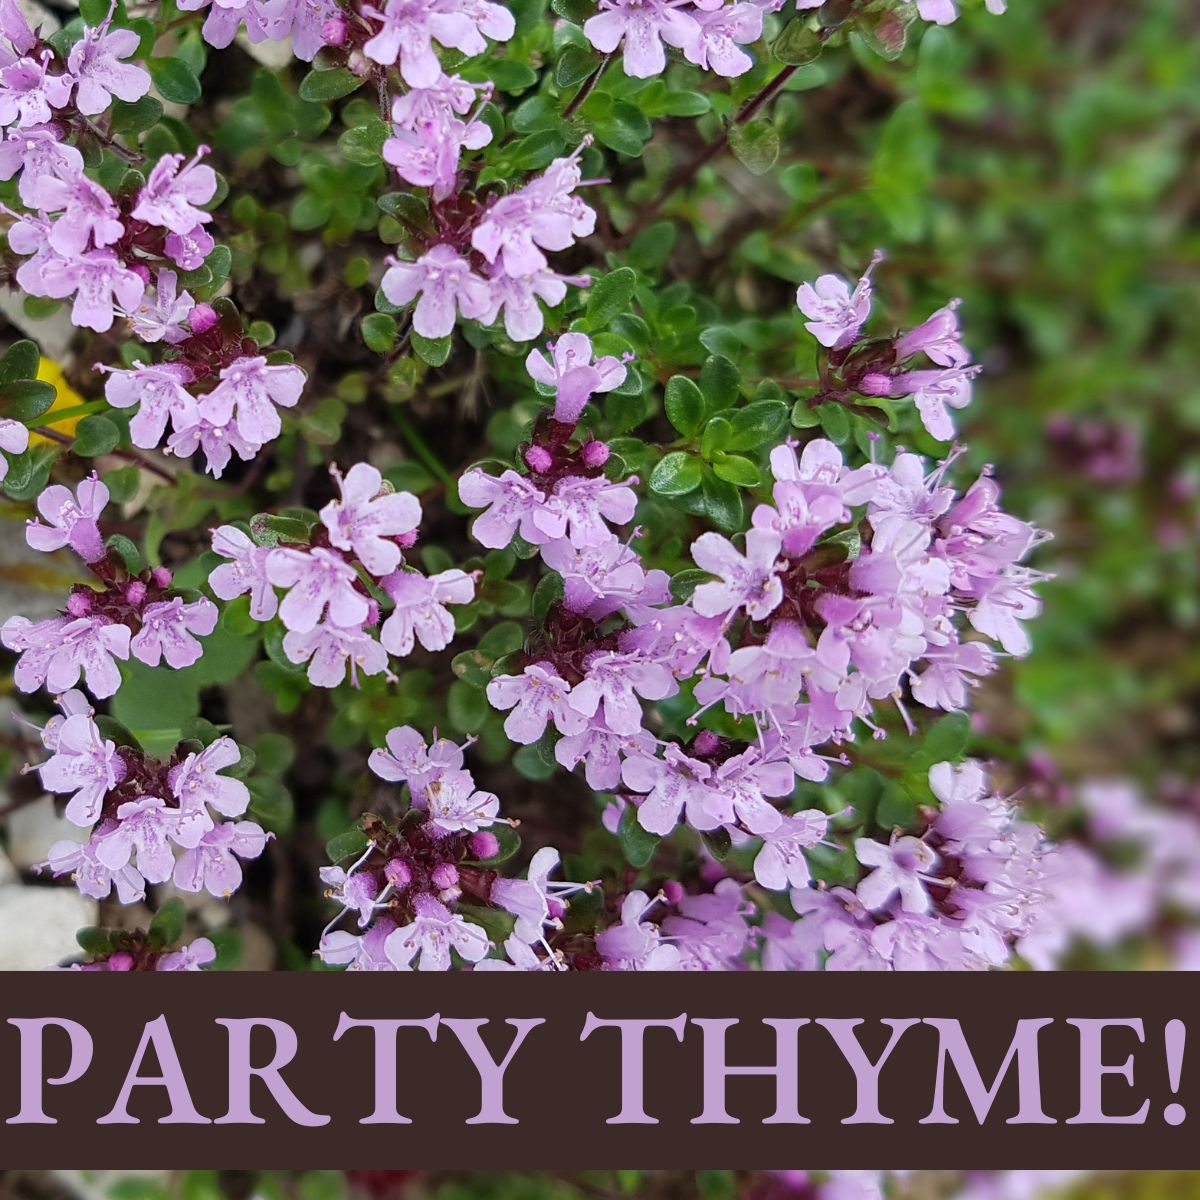 party thyme!